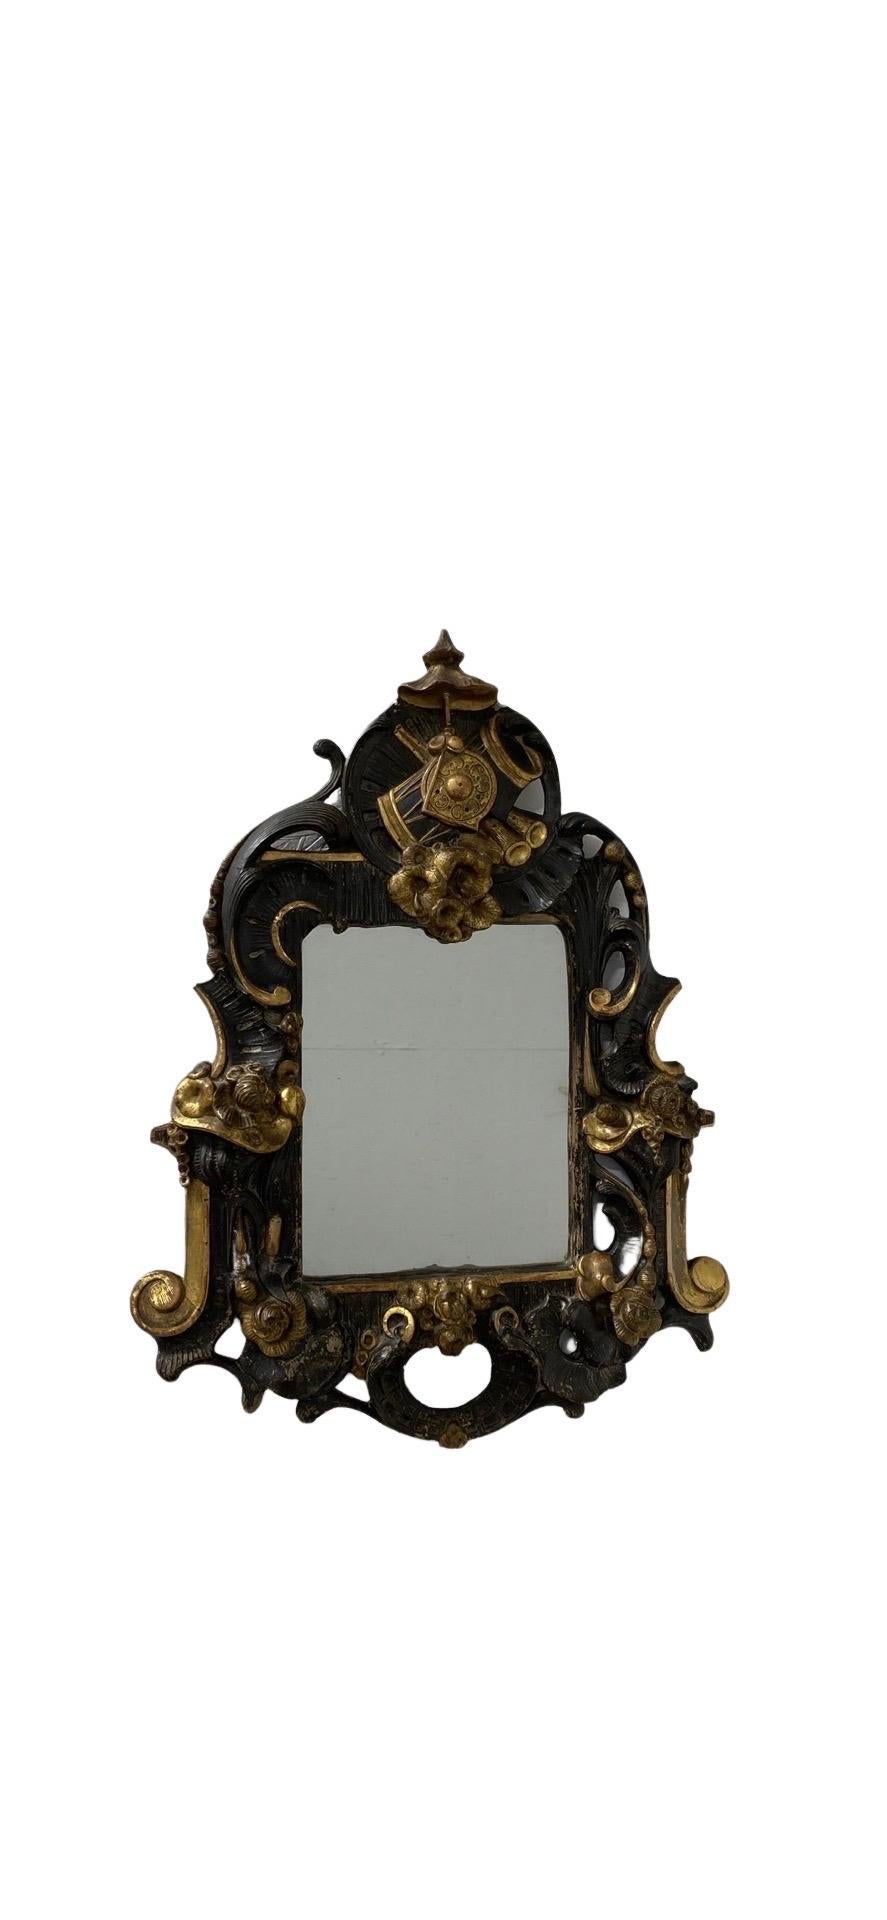 Antique French finely carved gilt and carved wood musical wall mirror Circa 1830.
Mirror features and ebonized body, gilt detailing, pierced frame and a wonderful carved musical instrument form cartouche to the top.